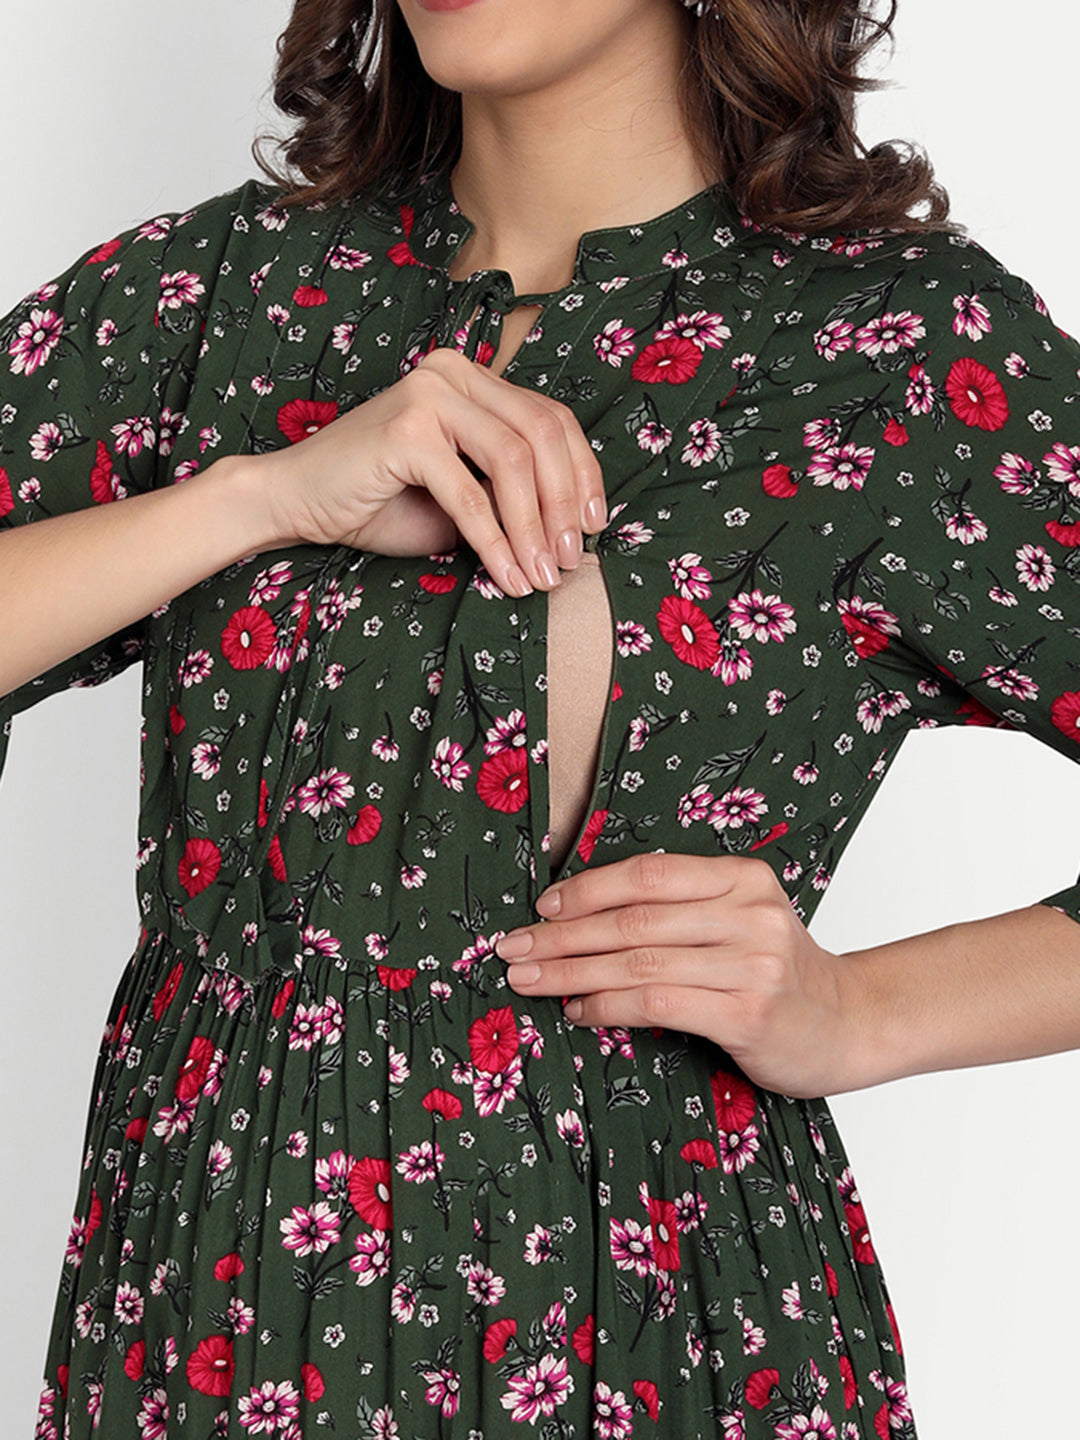 Green & Red Floral Printed Maternity Midi Dress